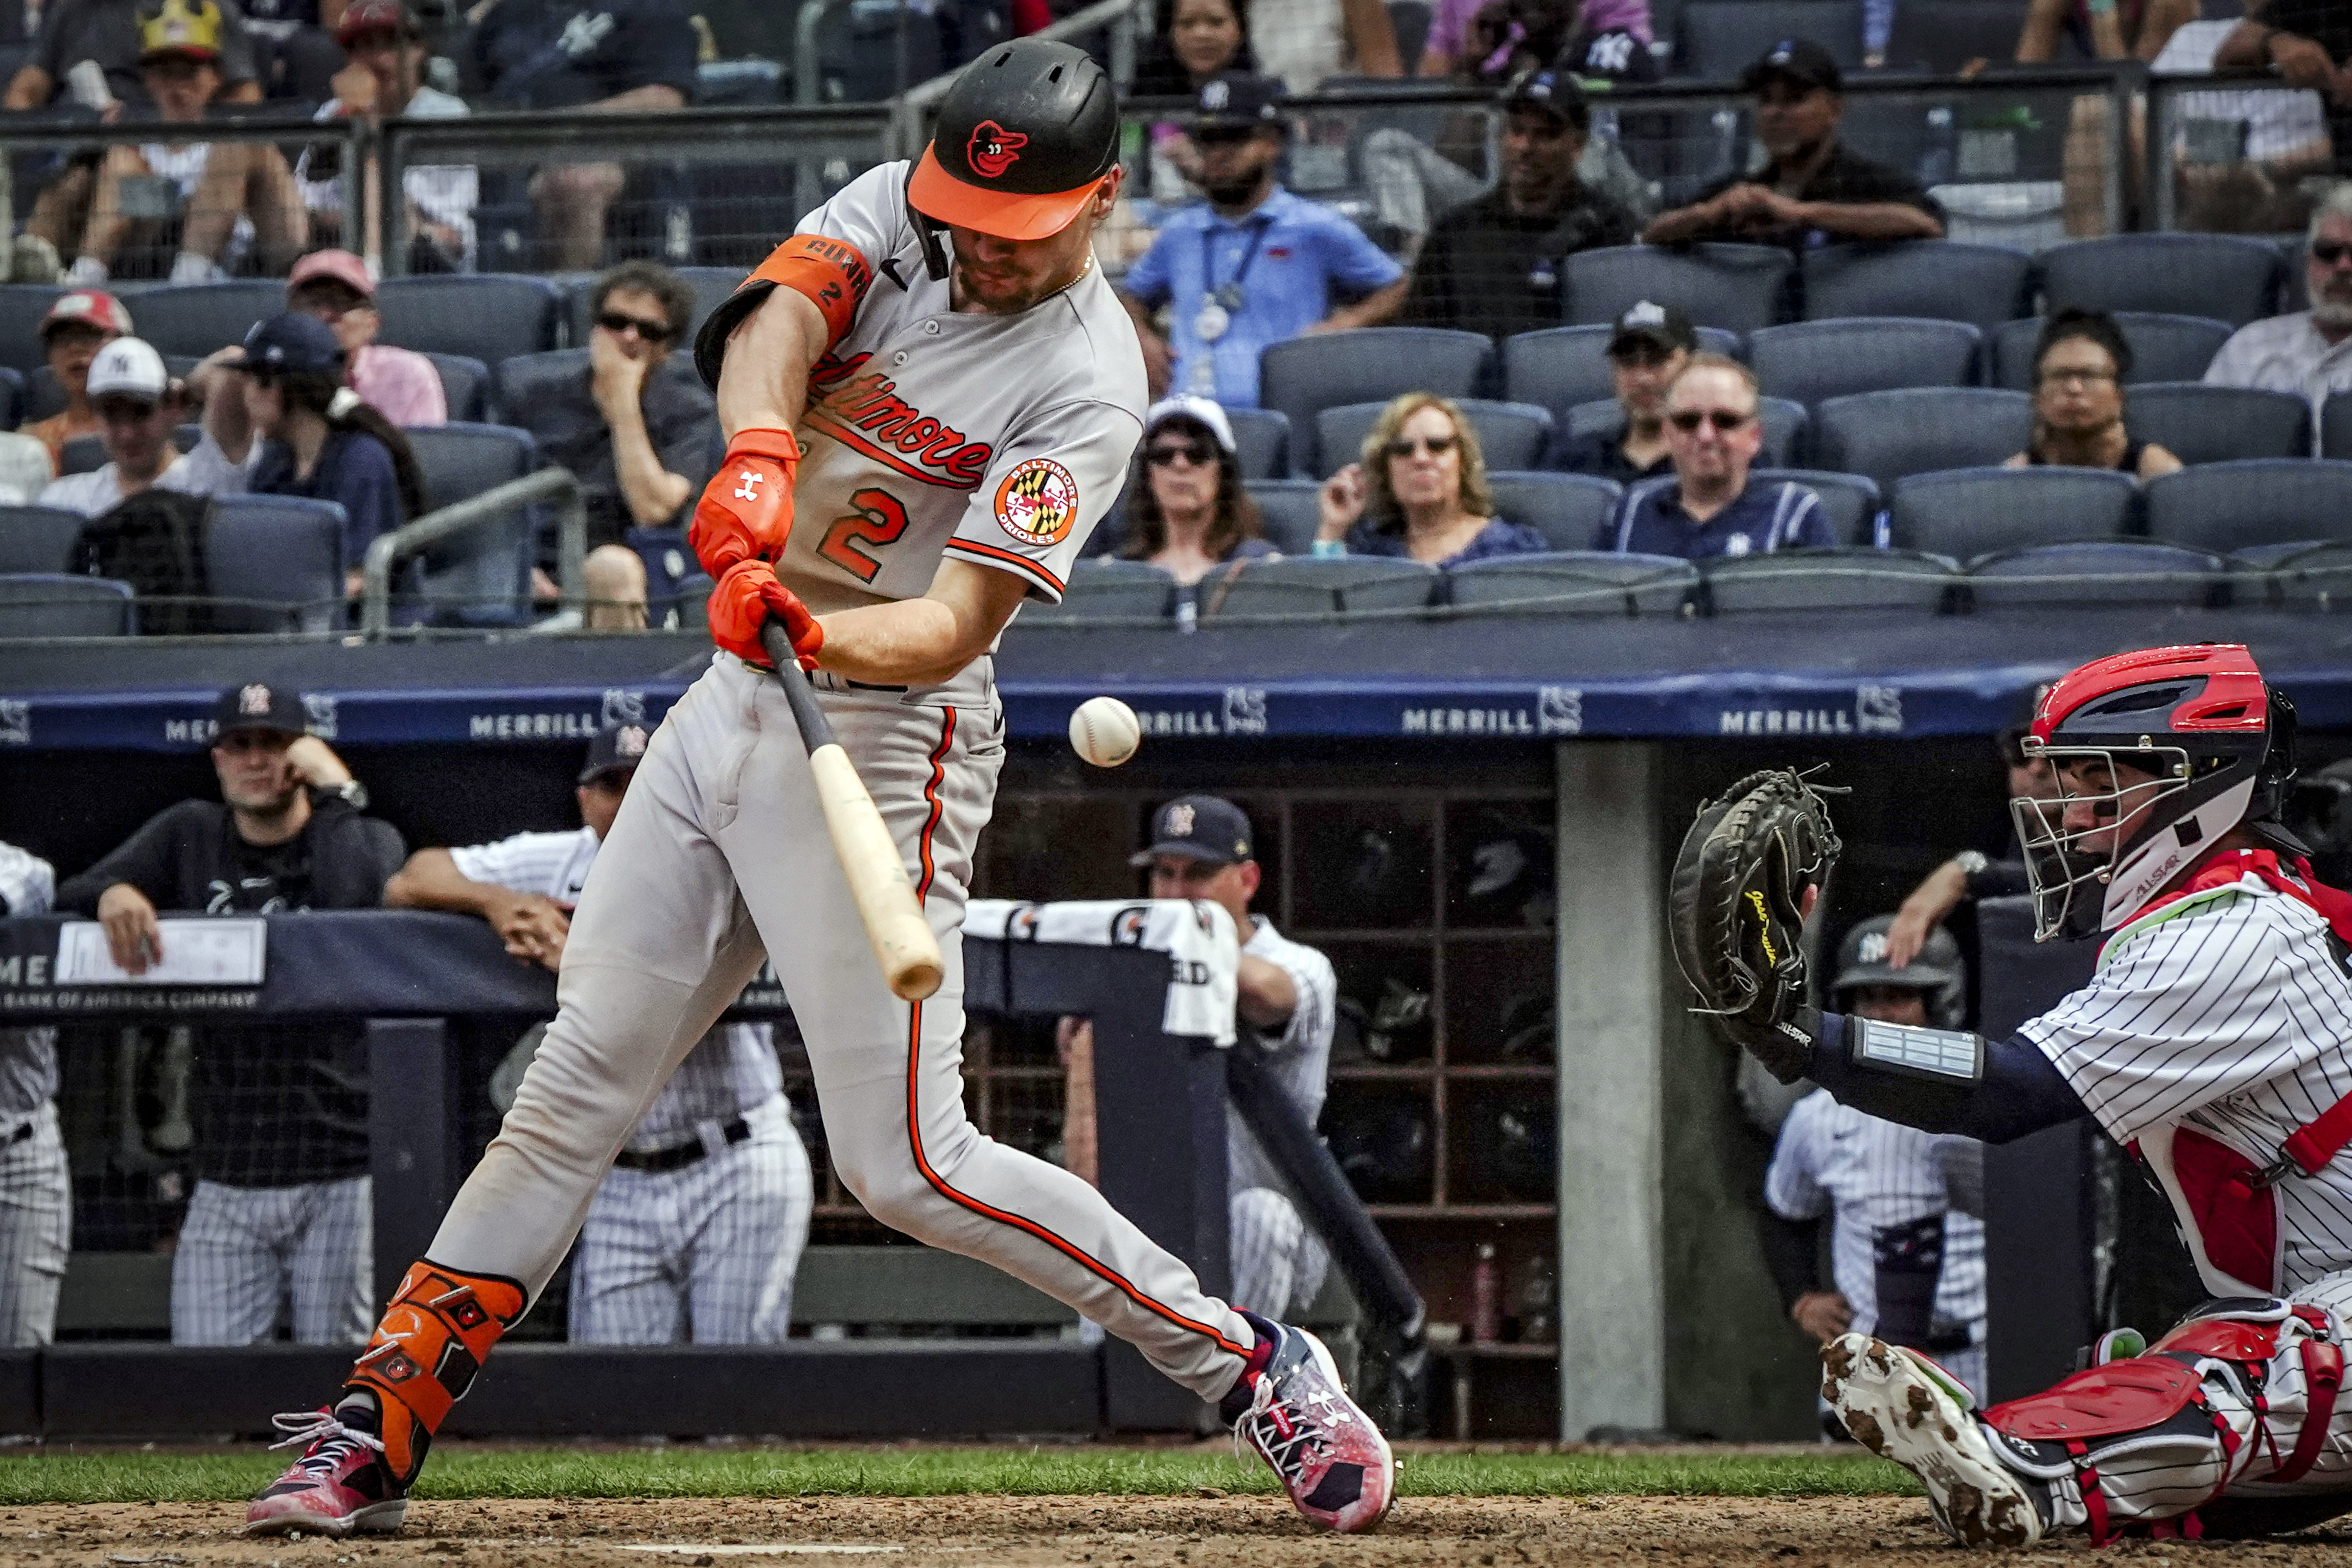 Harrison Bader's 8th inning homer gives Yankees win over Orioles